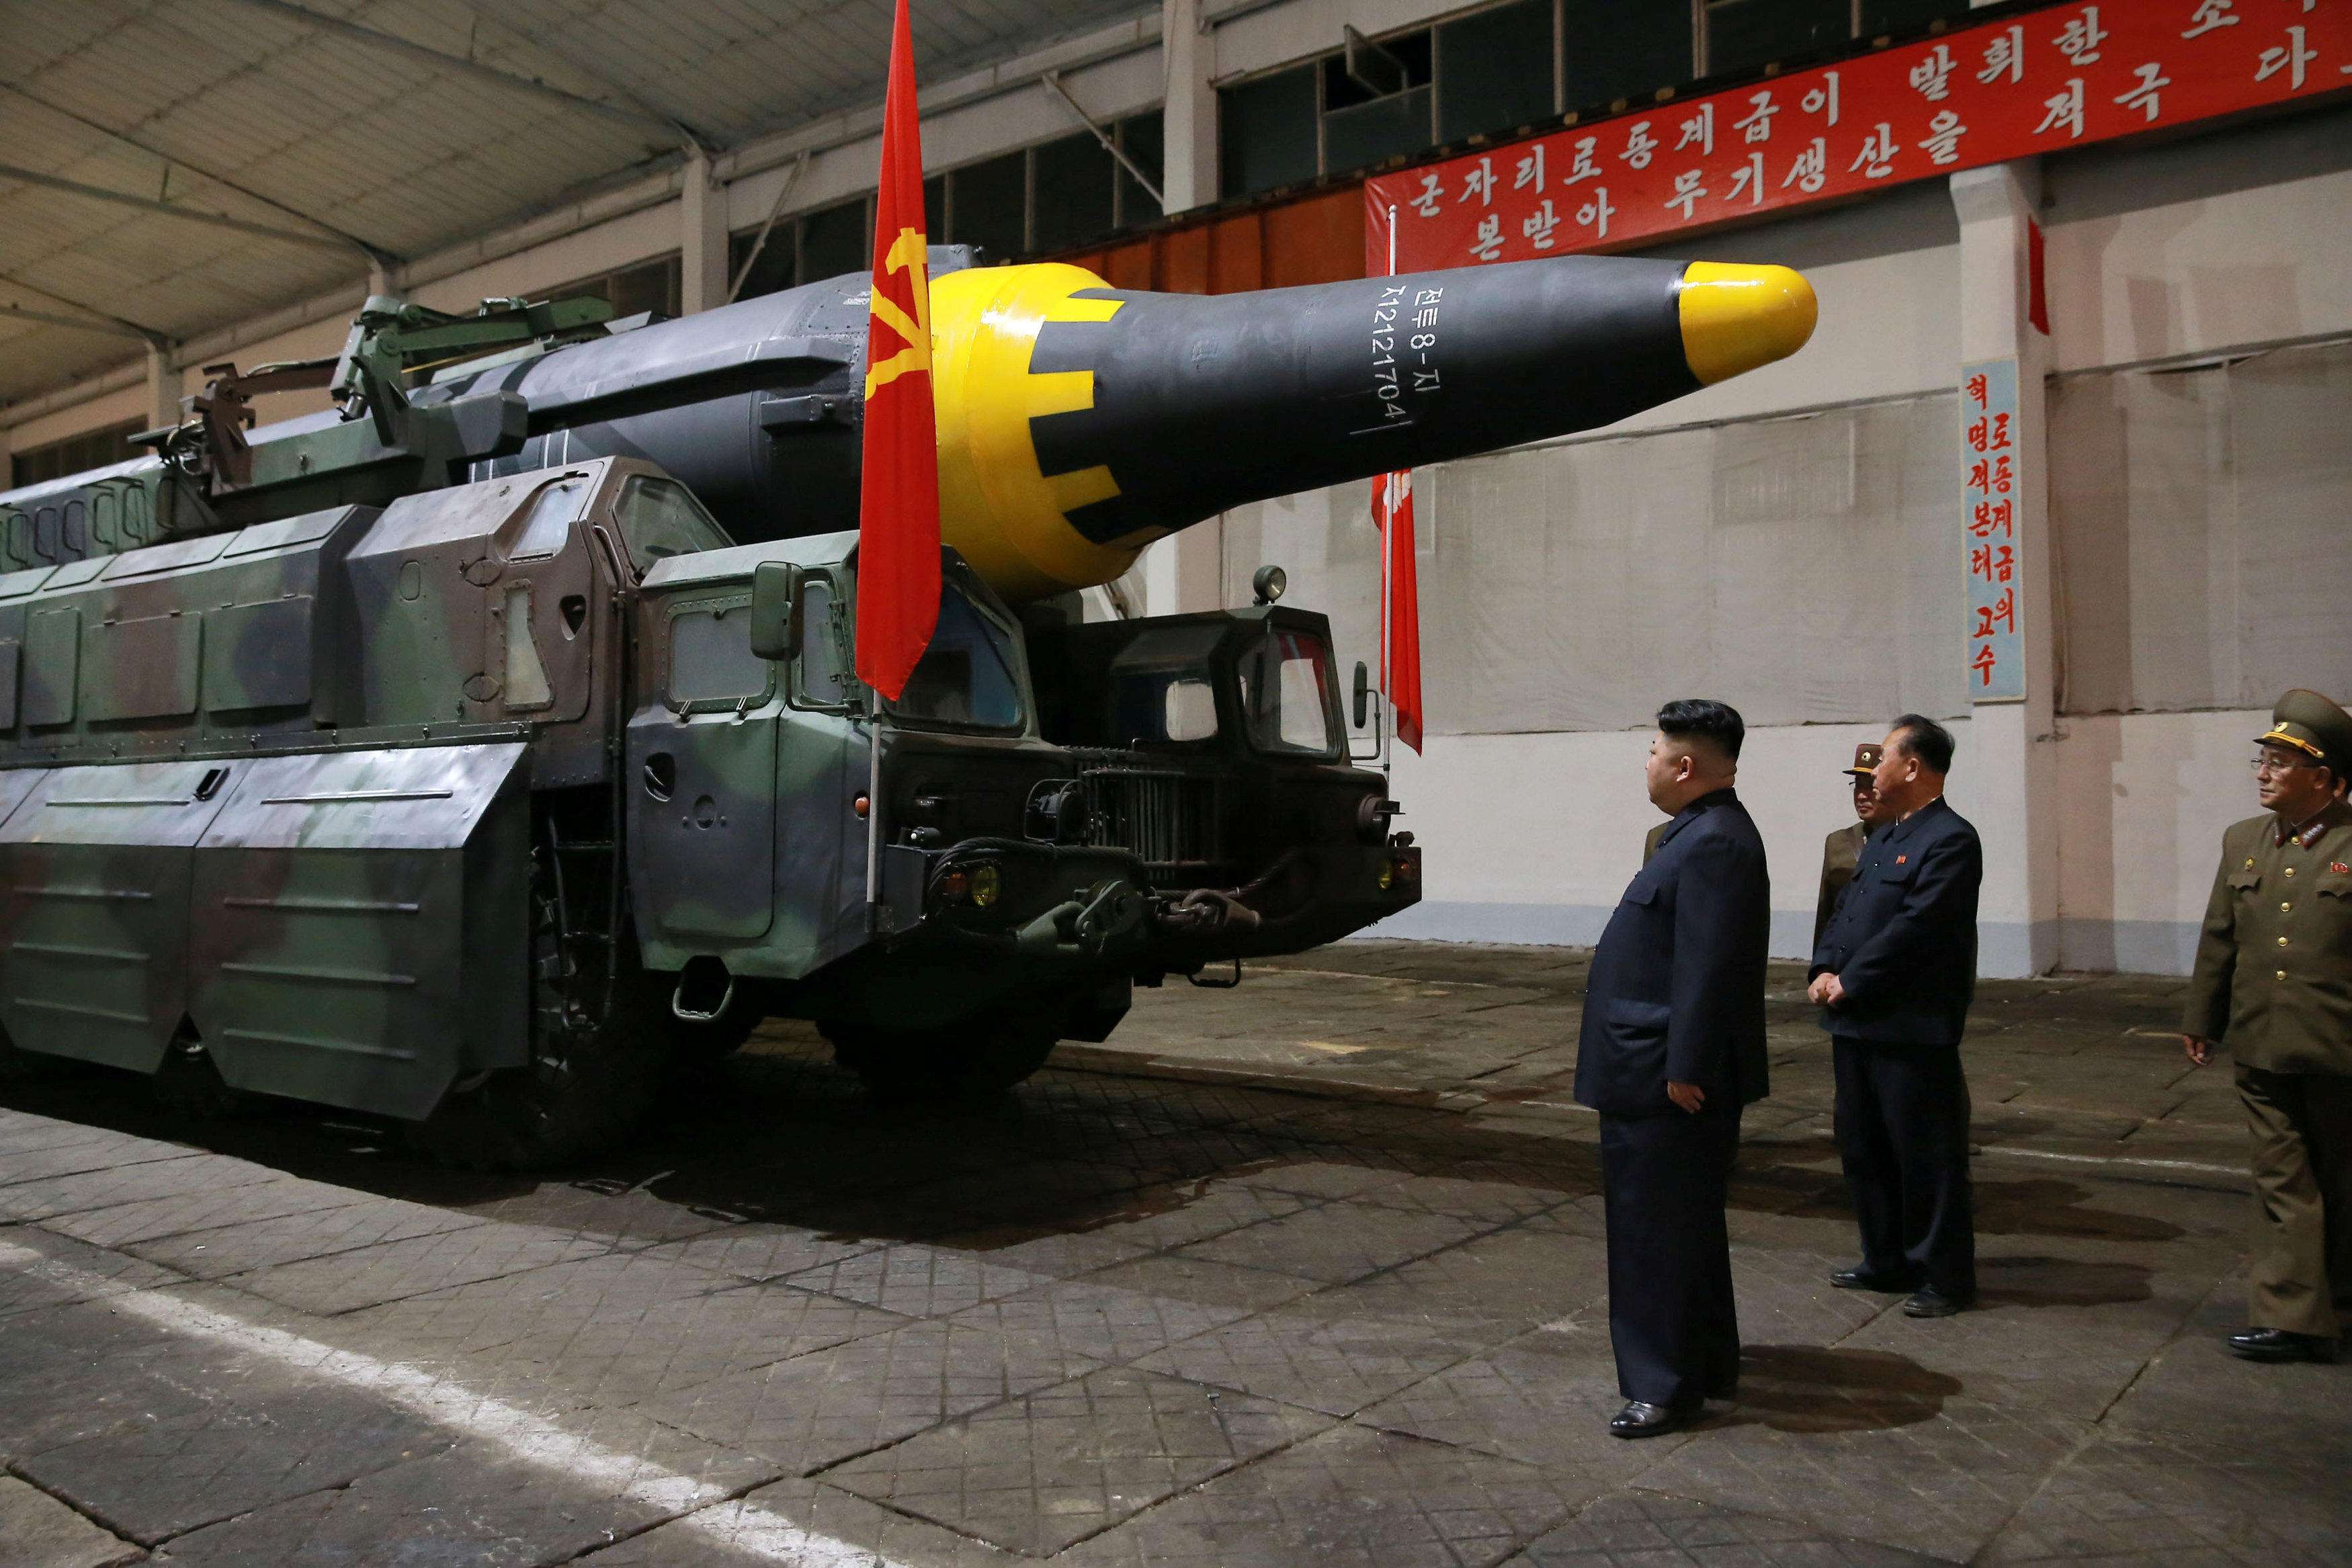 North Korea Missile Test Of Kn 17 Capable Of Carrying Large Heavy